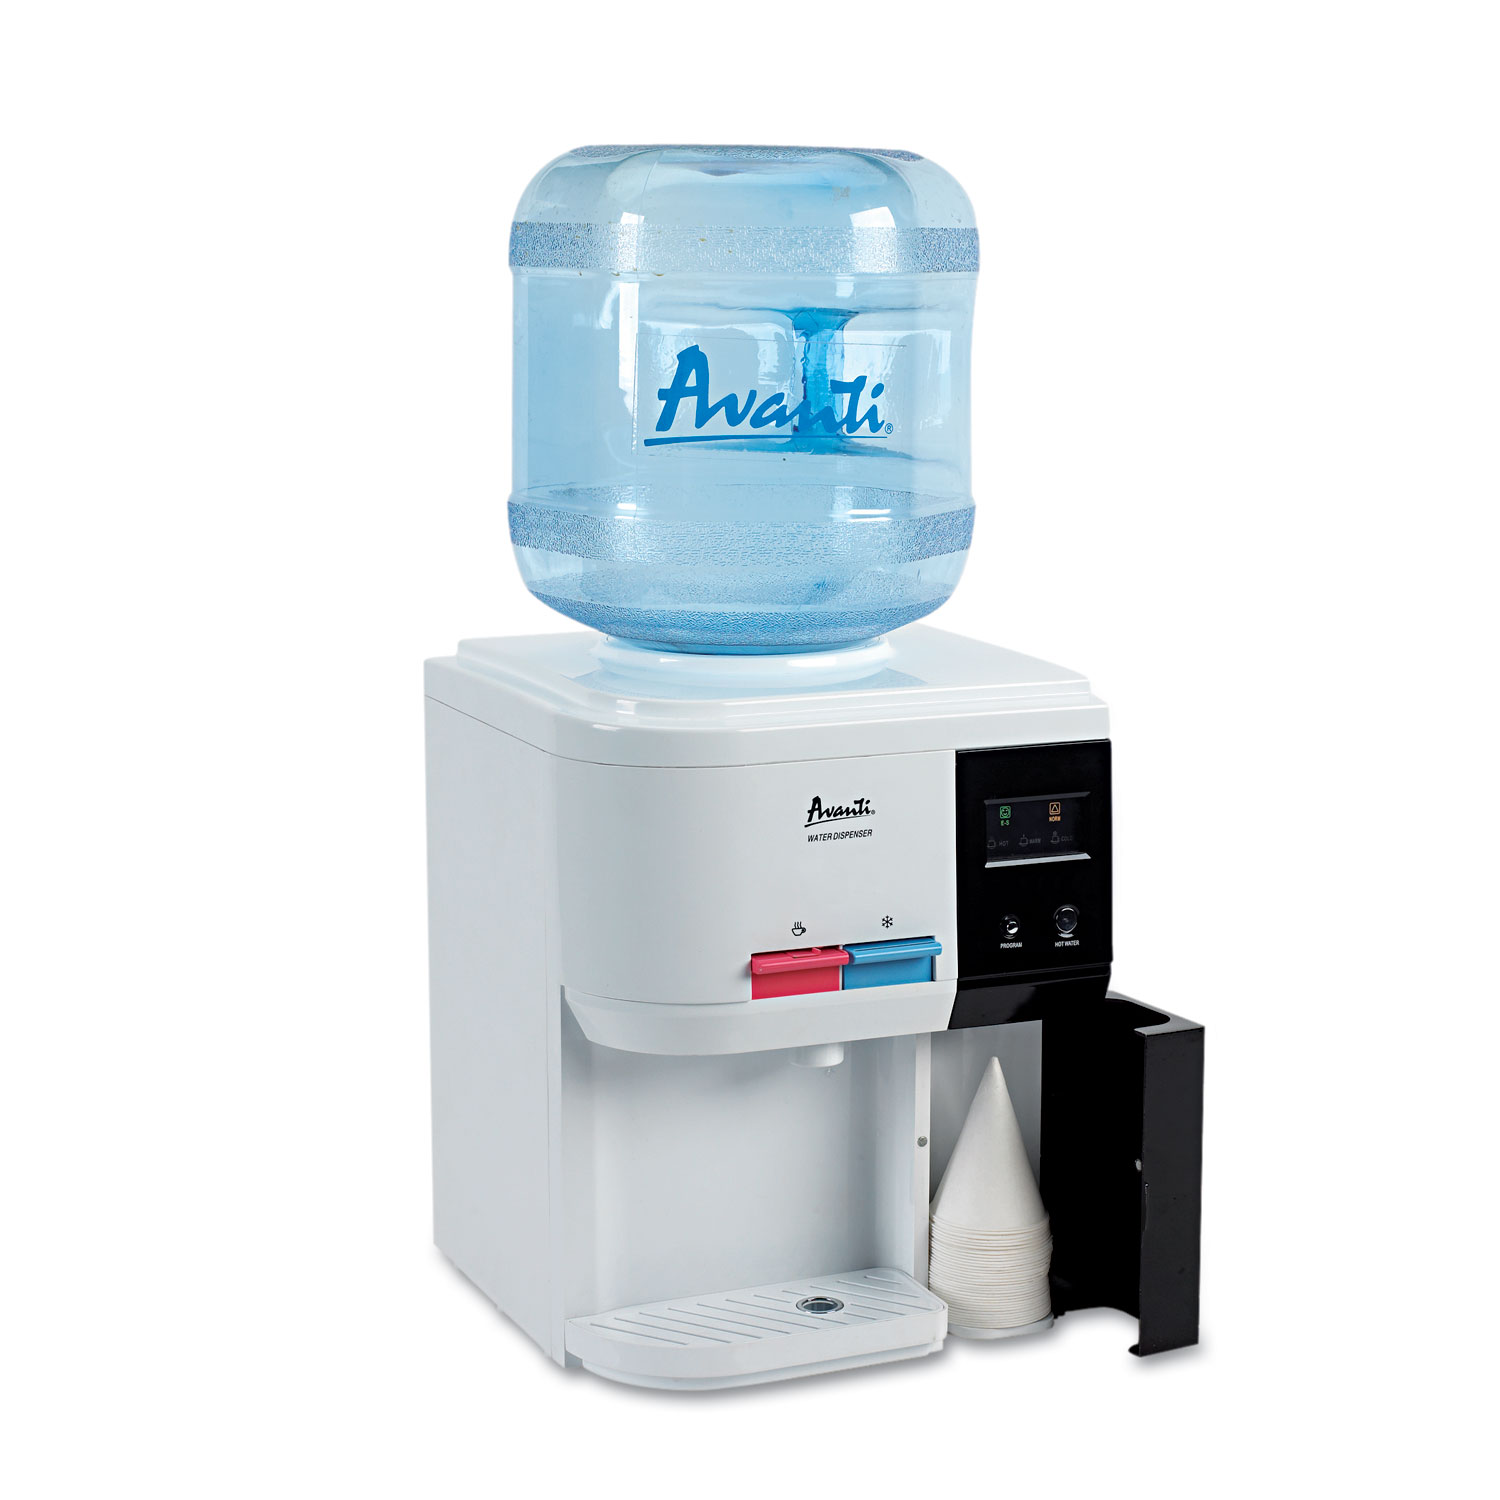  Avanti WD31EC Tabletop Thermoelectric Water Cooler, 13.25 dia. x 15.75 h, White (AVAWD31EC) 